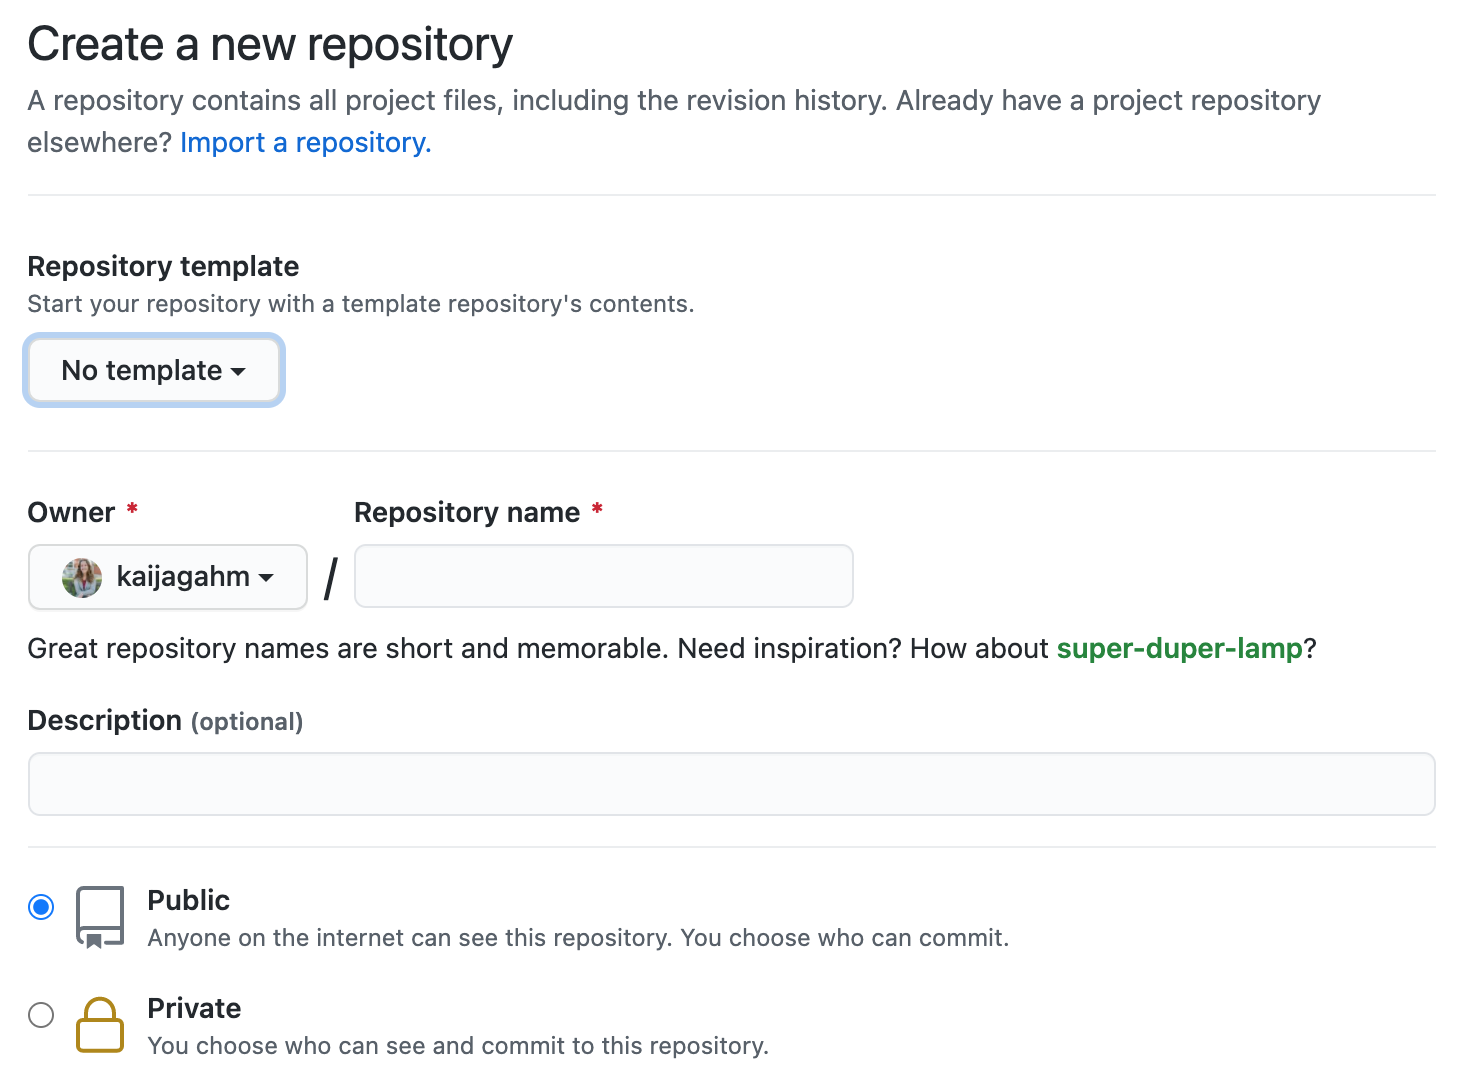 Entering information to create the new repo